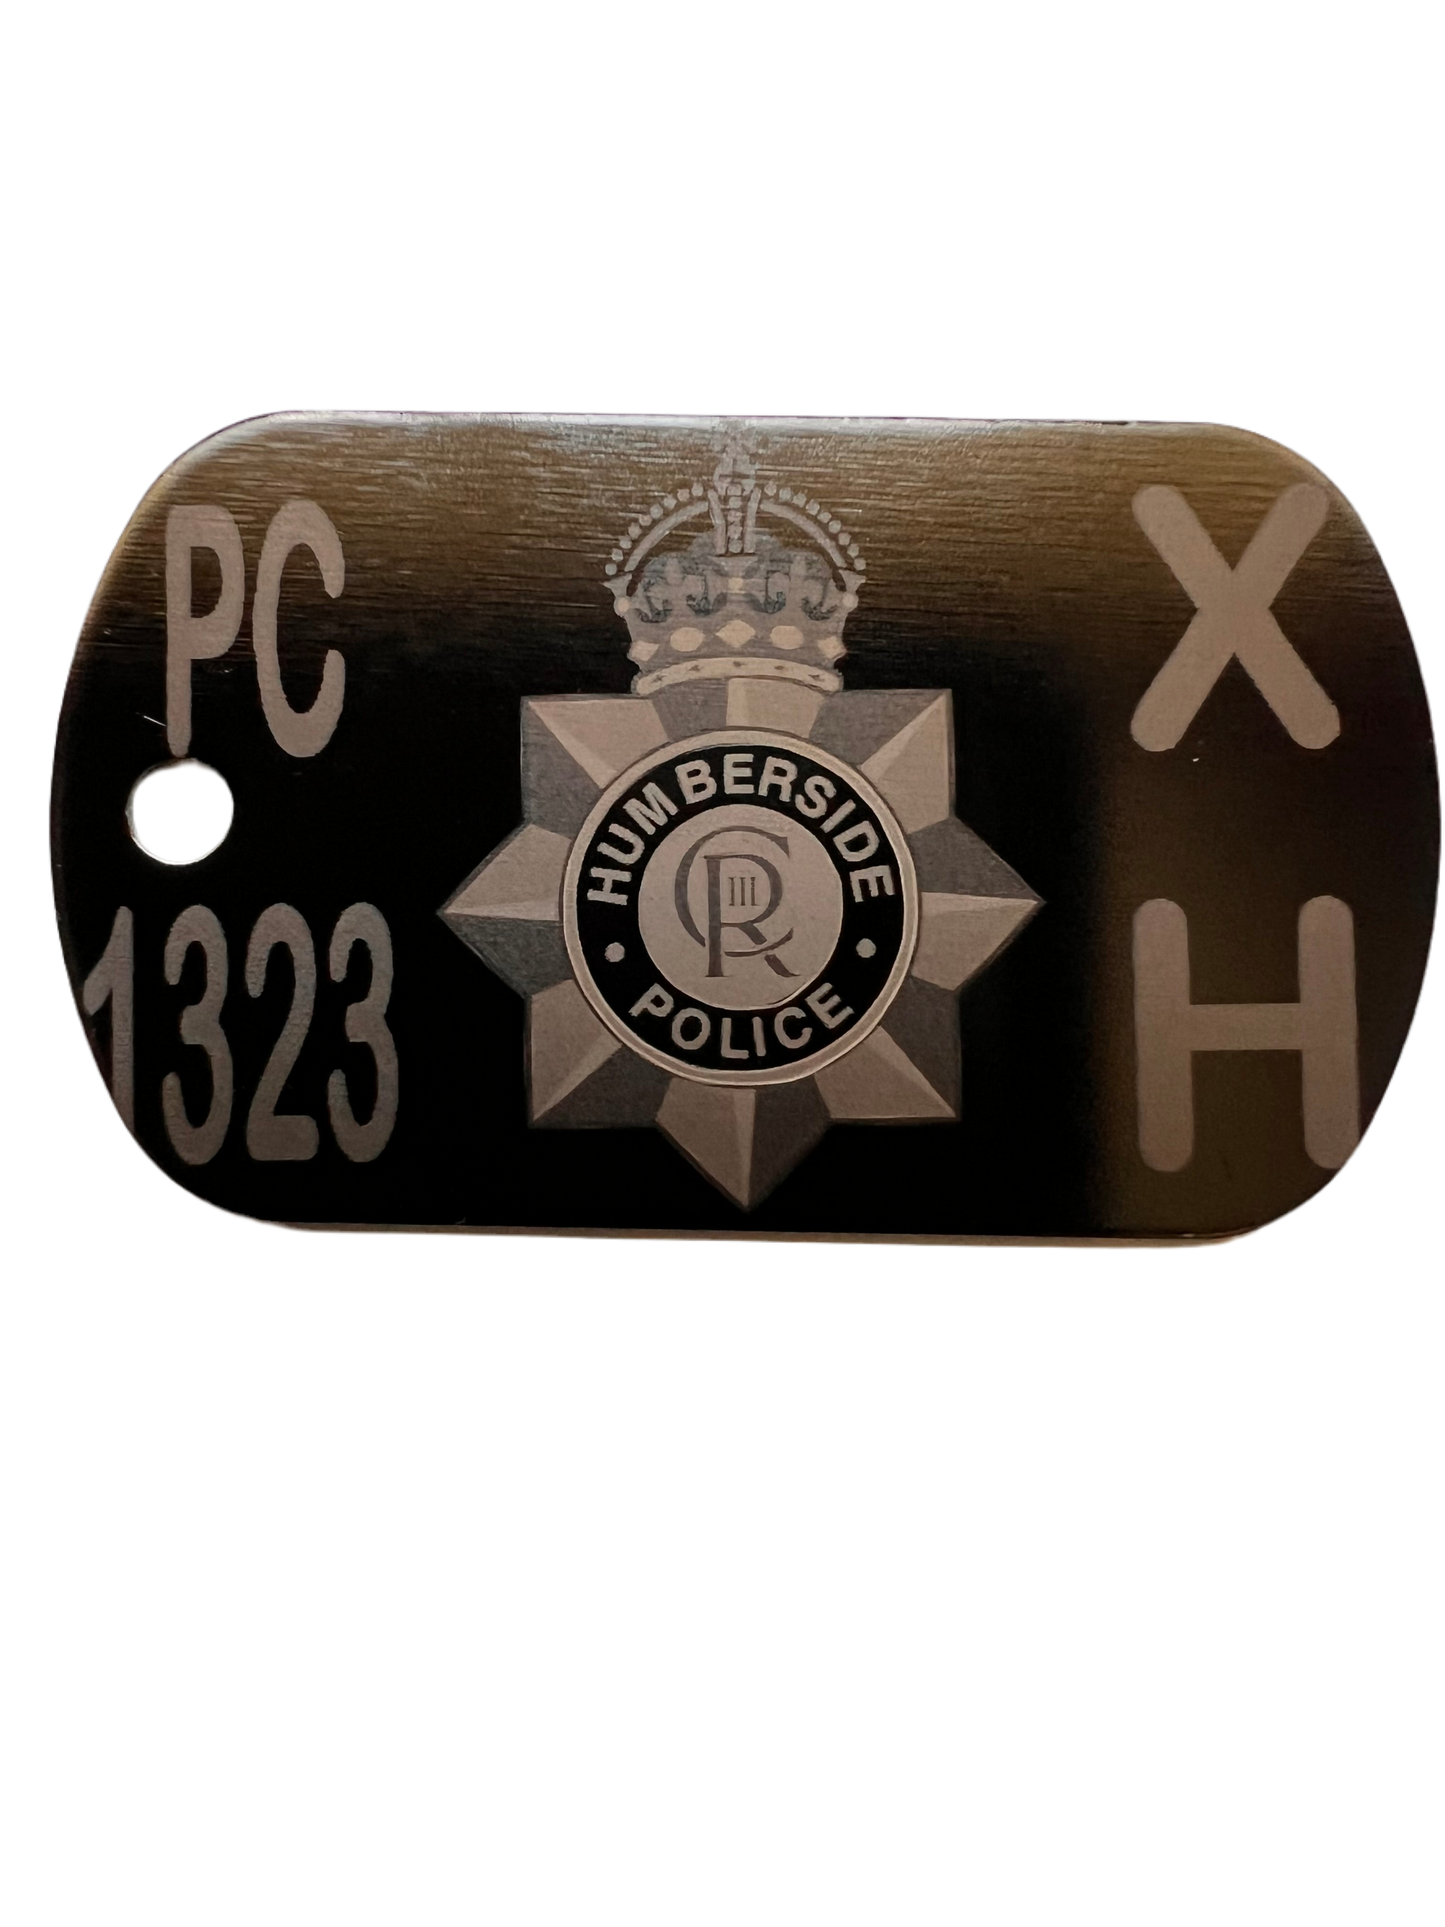 Personalised dog tag / keyring for Police officers